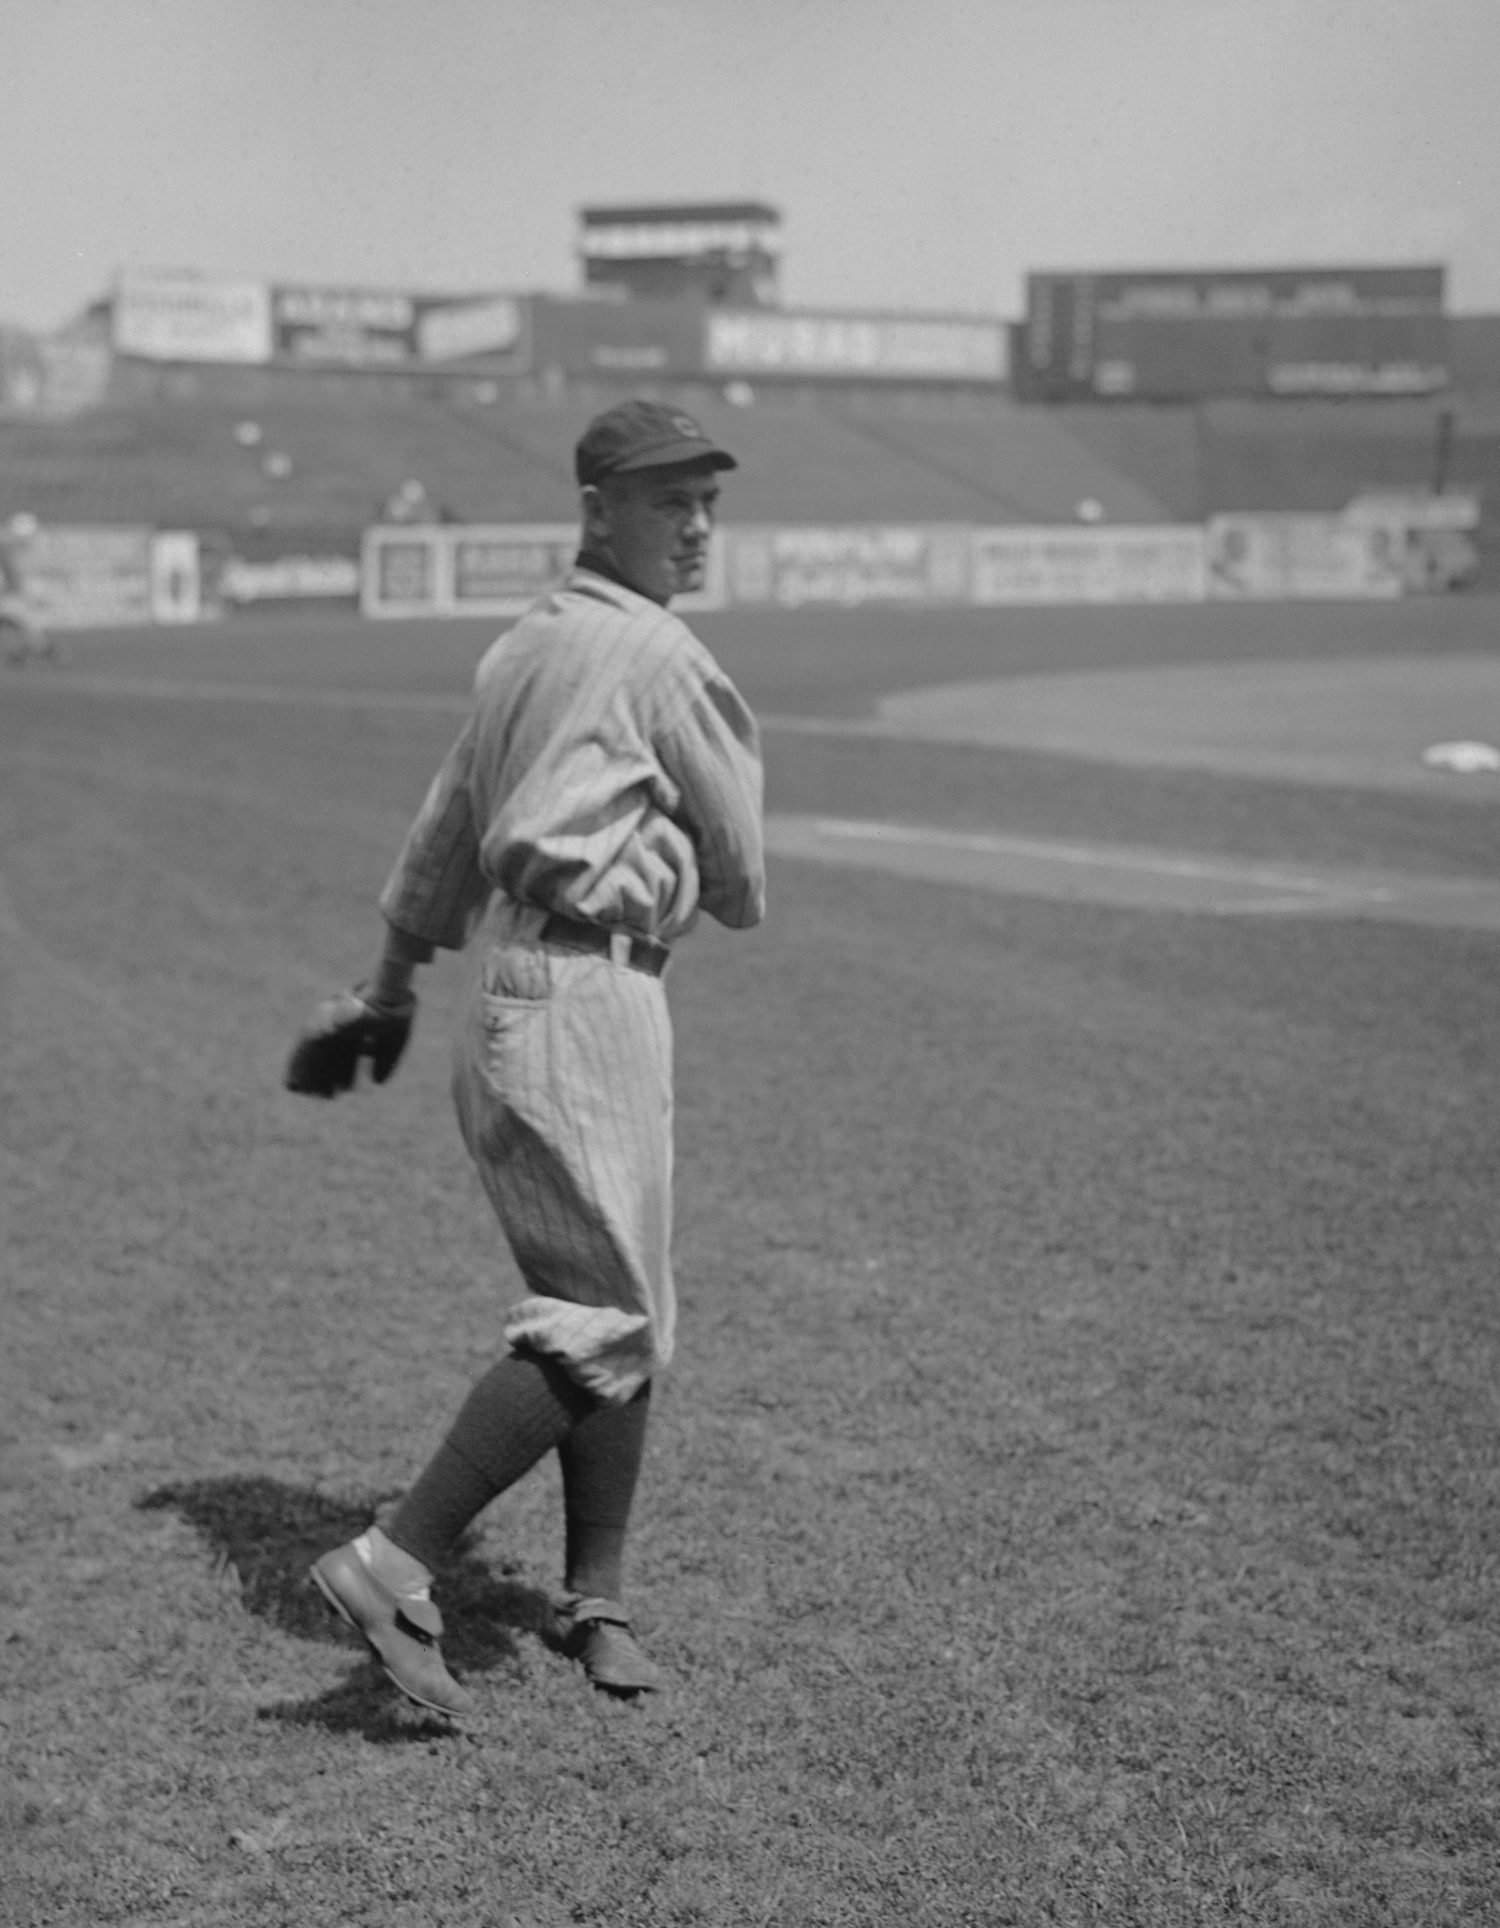 Ray Chapman, of the Cleveland Indians in 1919. On August 17, 1920 he became the first player killed during a major league baseball game after a pitch by Yankees' Carl Mays hit his head.